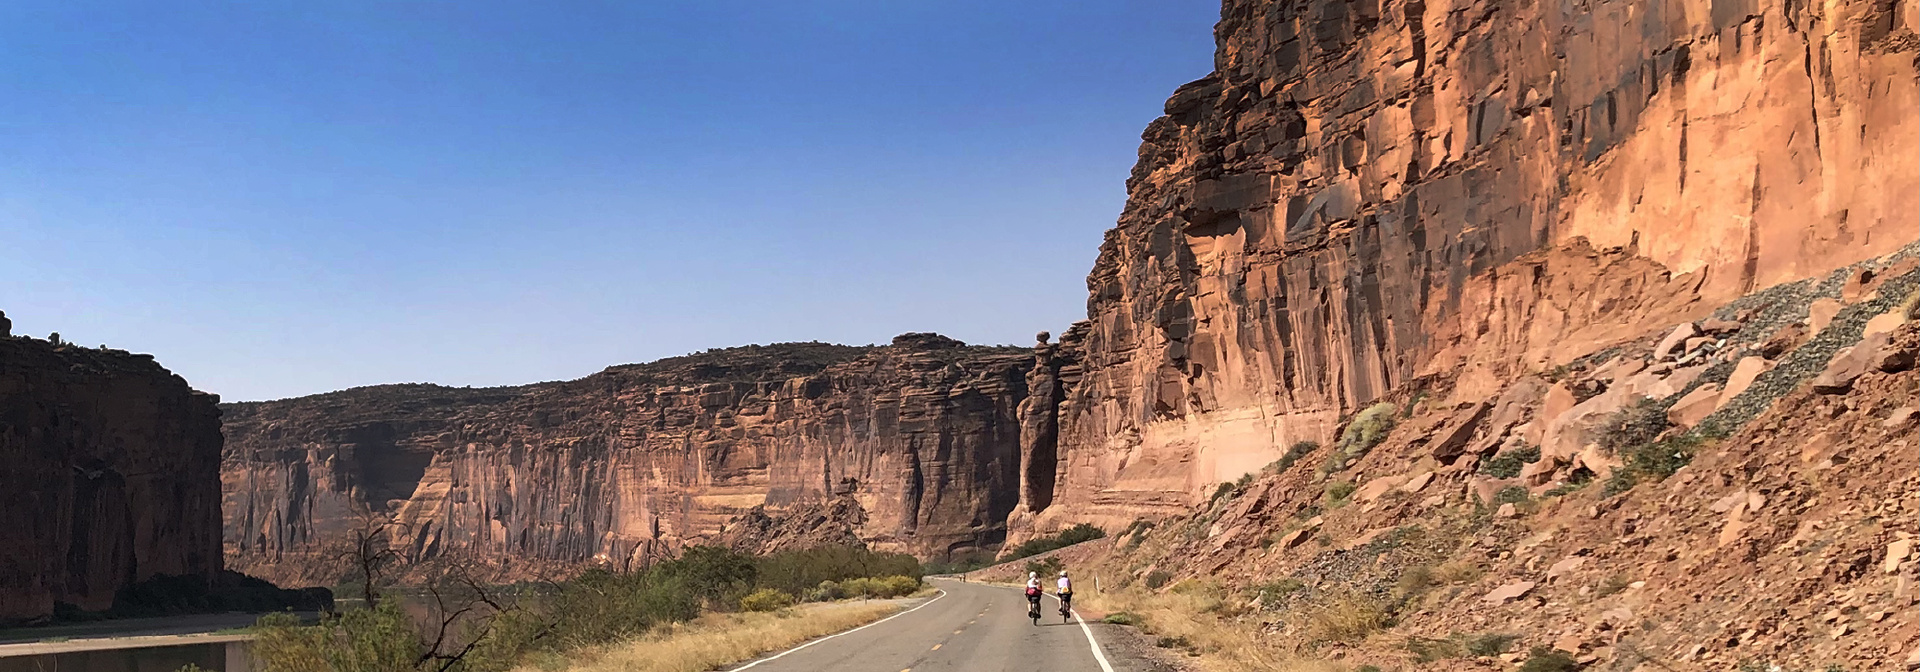 Utah Bike Tour: Moab Arches and Canyonlands